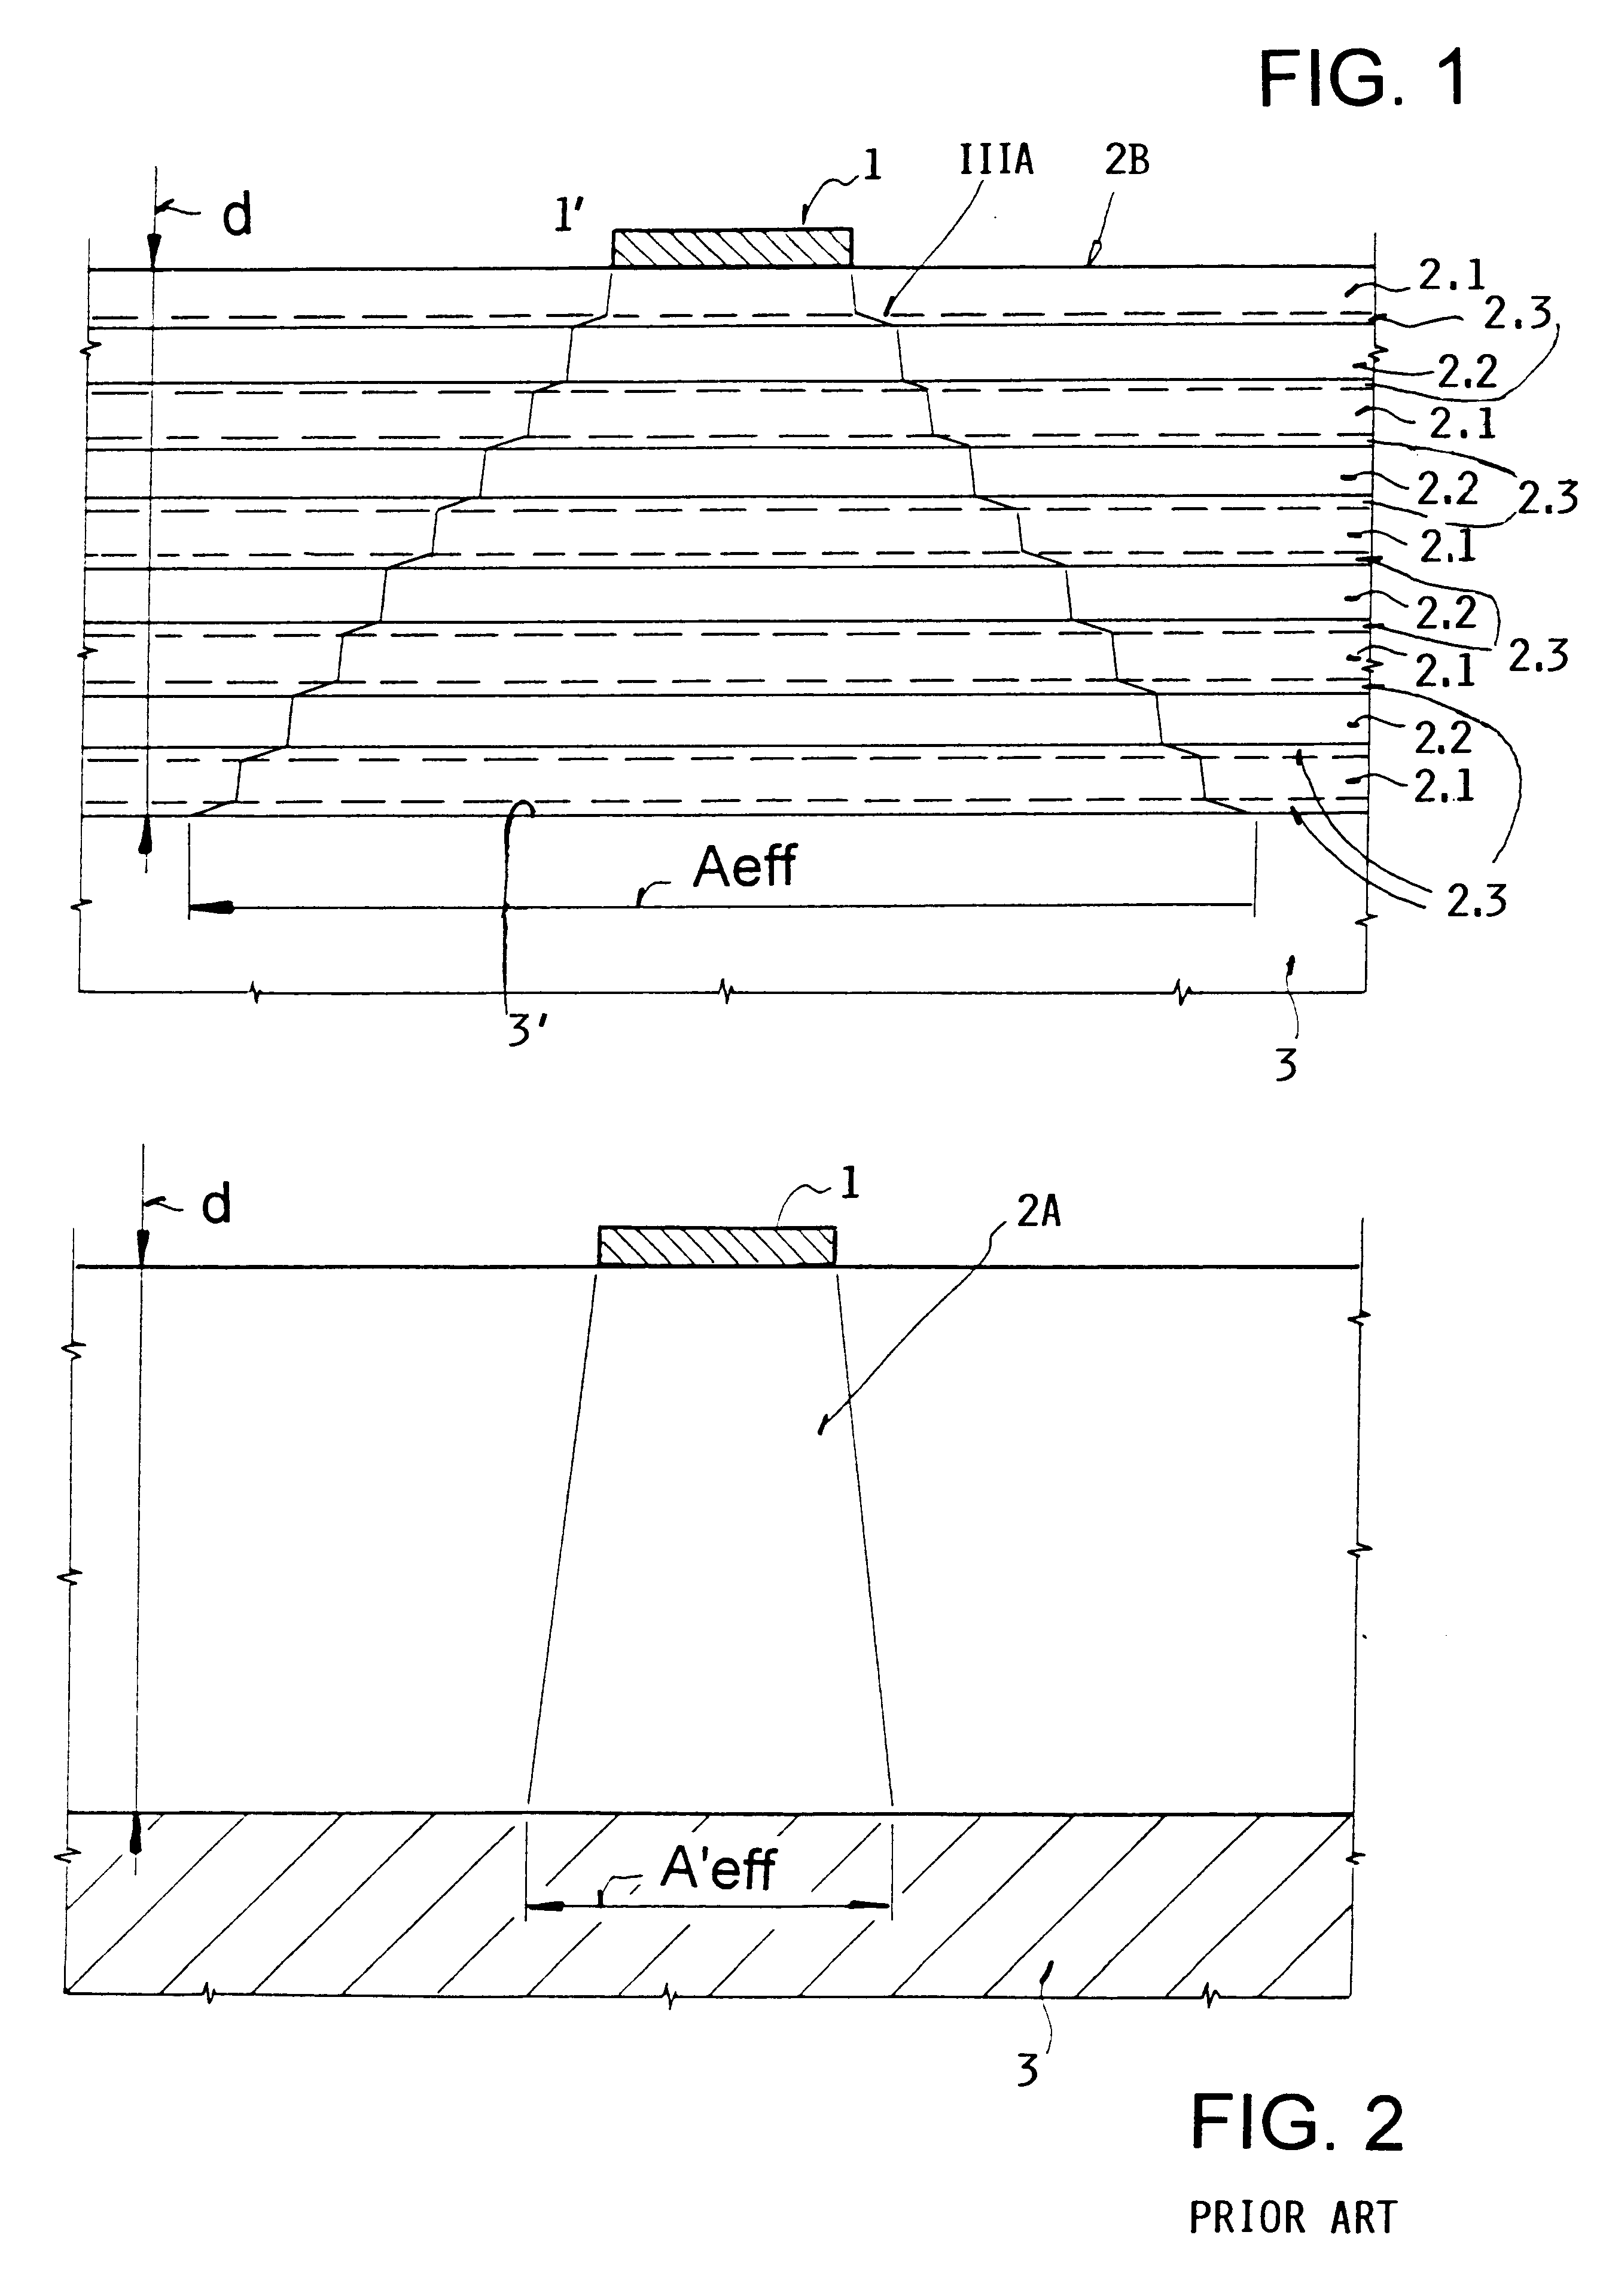 Layered semiconductor structure for lateral current spreading, and light emitting diode including such a current spreading structure